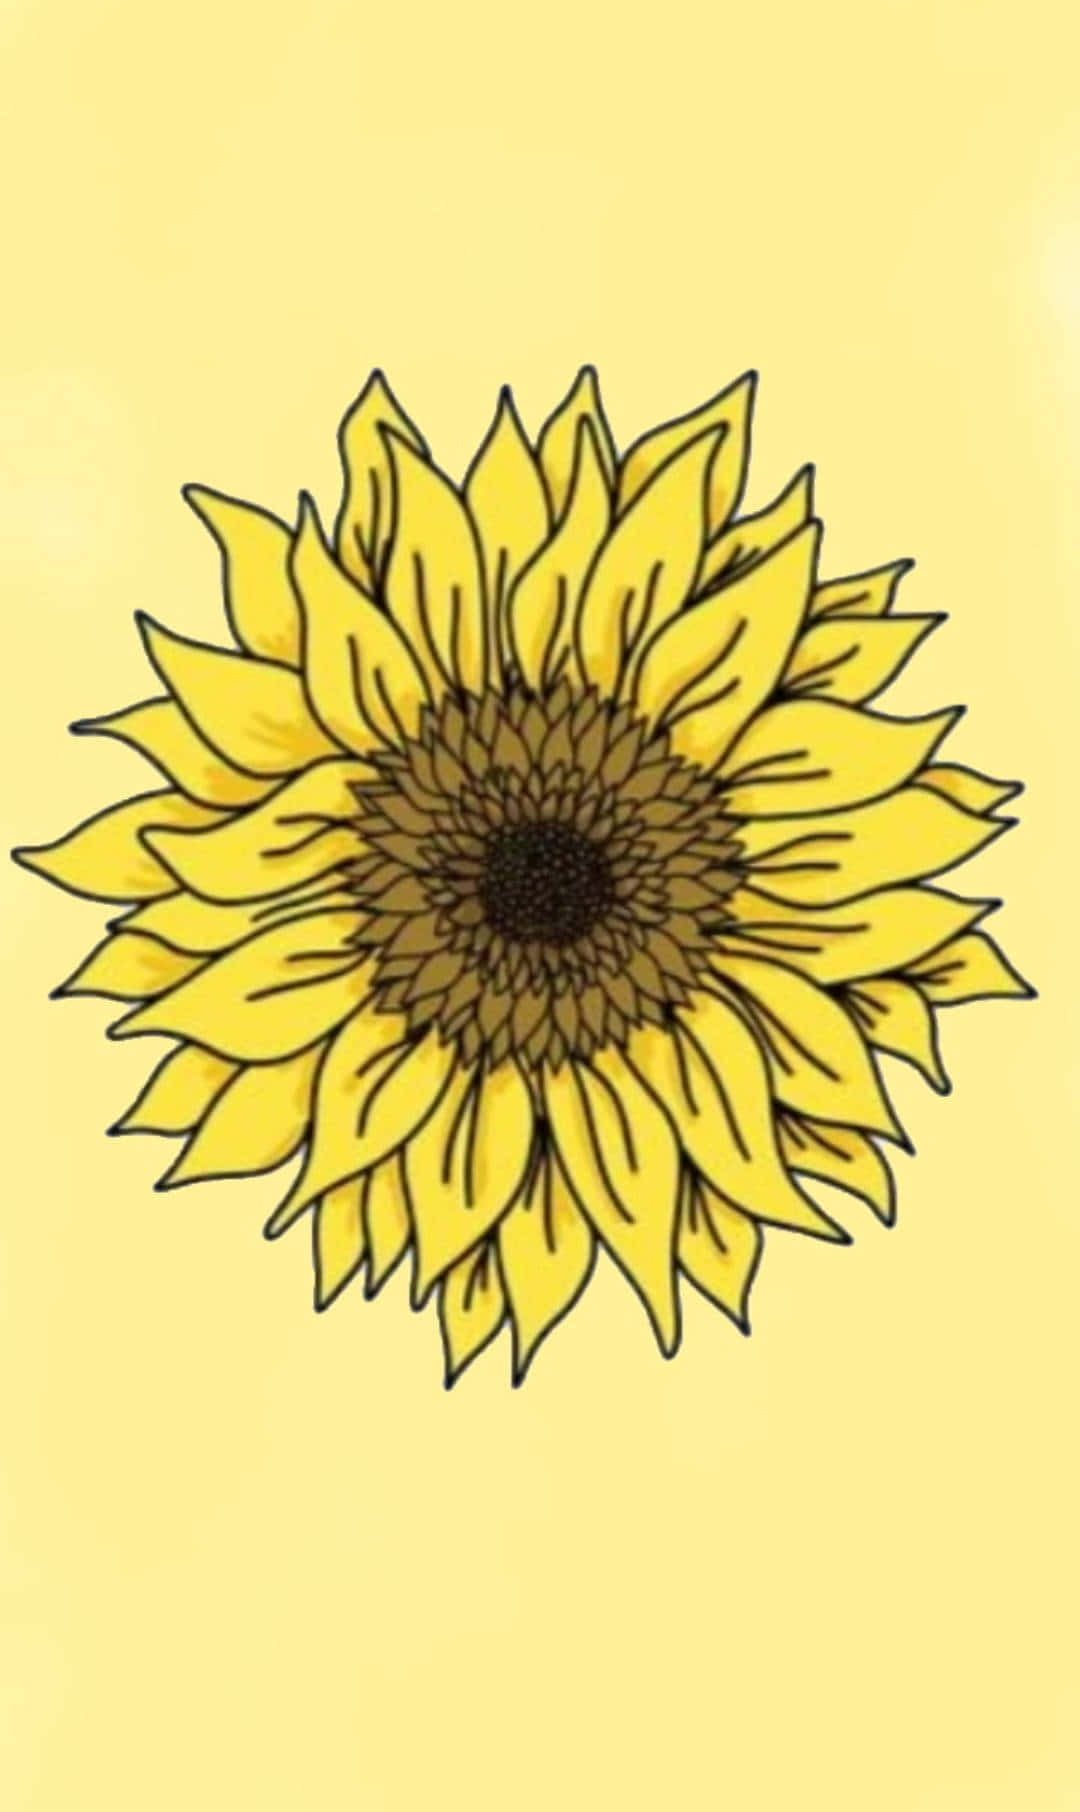 Sunflower Aesthetic White Transparent, Aesthetic Watercolor Wind Golden  Sunflower Patterns, Sunflower Clipart, Cartoon, Sunflower PNG Image For  Free Download